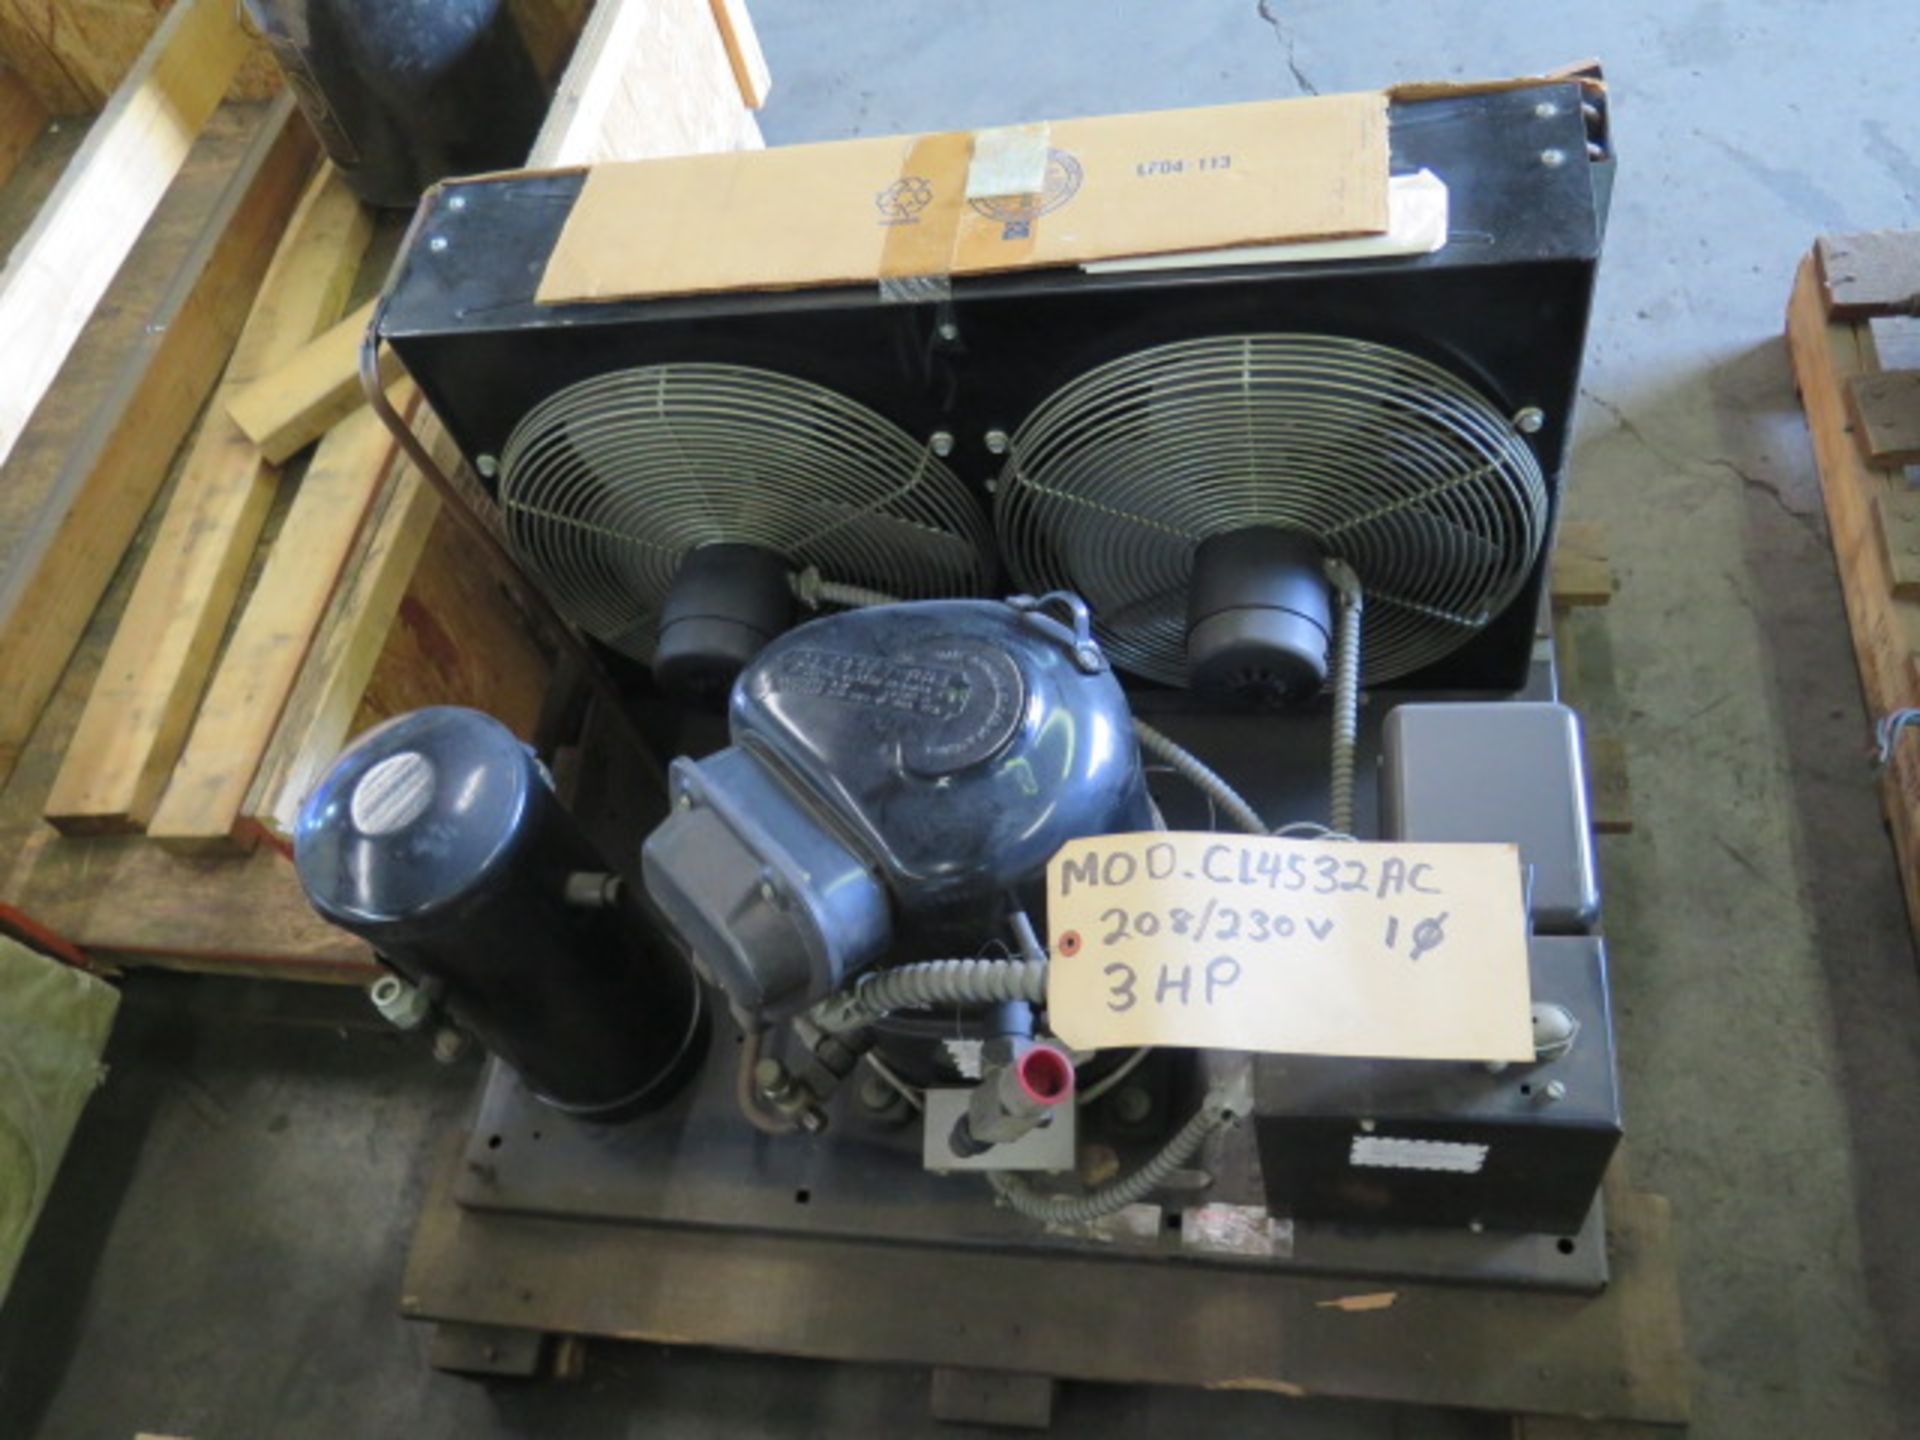 Tecumseh mdl. CL4532AC Refrigeration Pump (NEW) (SOLD AS-IS - NO WARRANTY) - Image 2 of 7